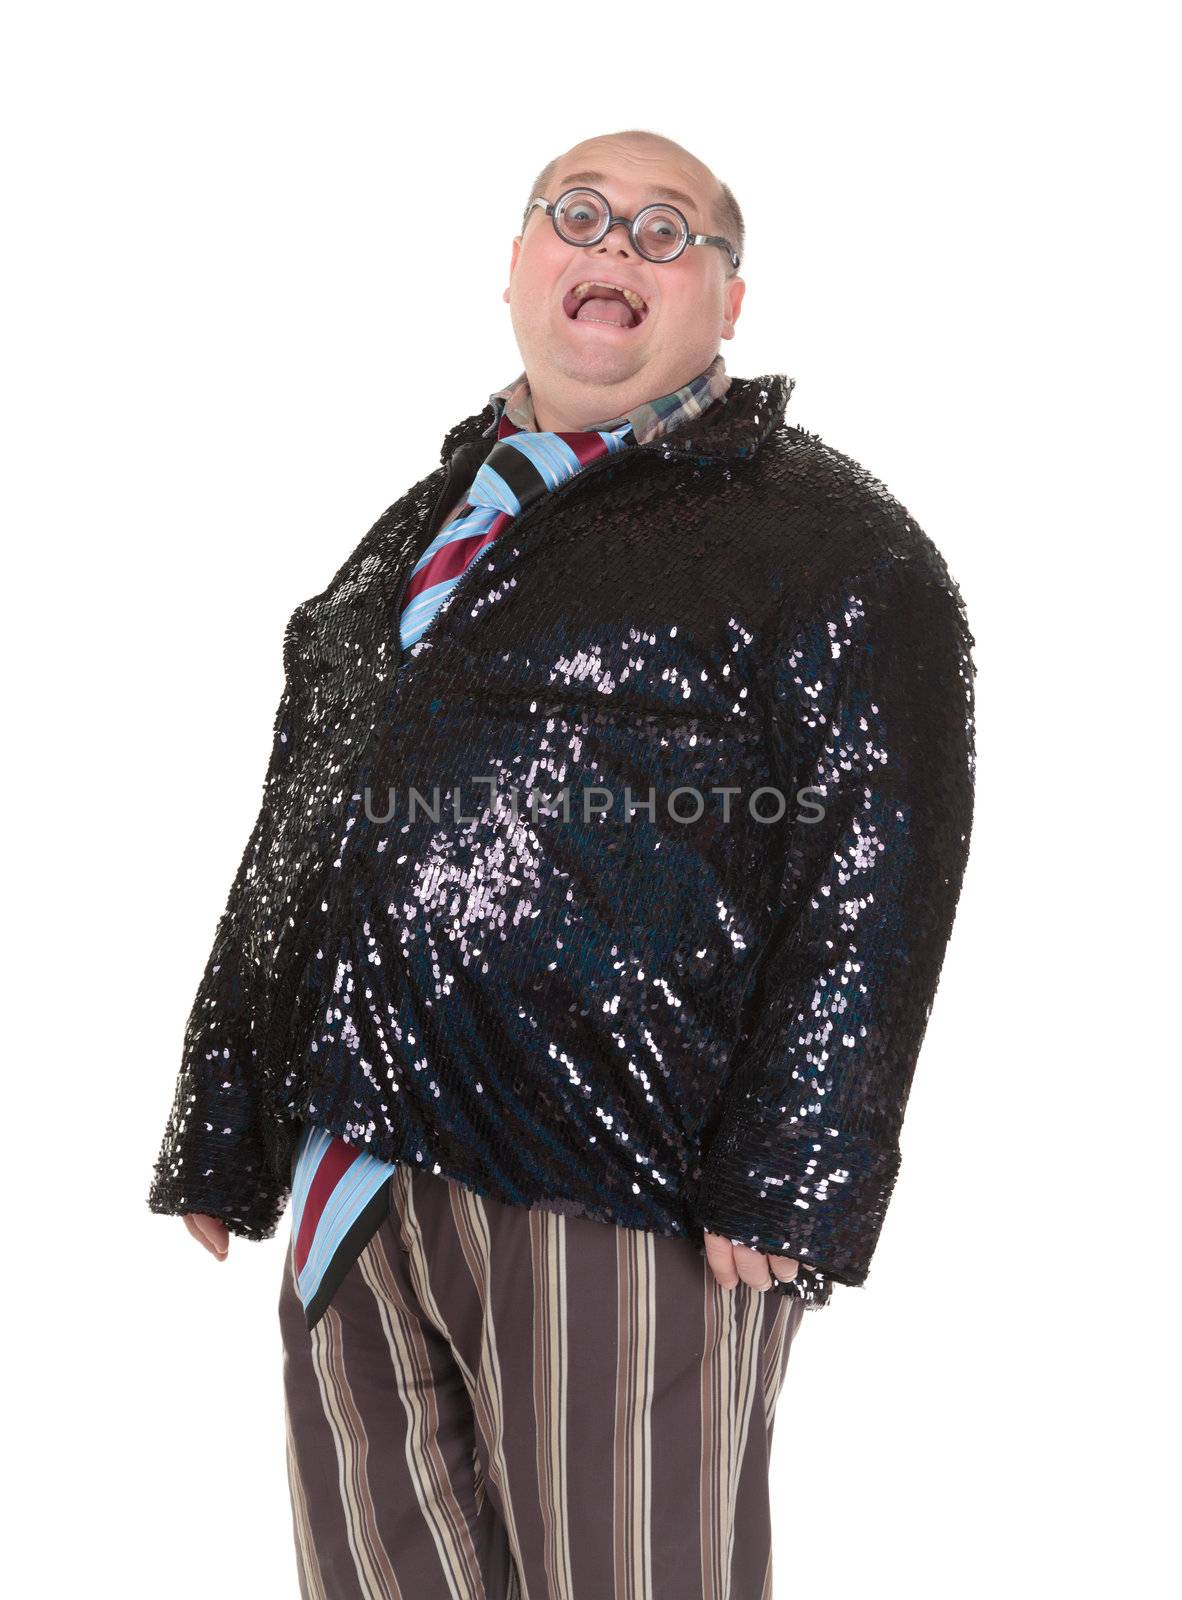 Obese man with an outrageous fashion sense by Discovod